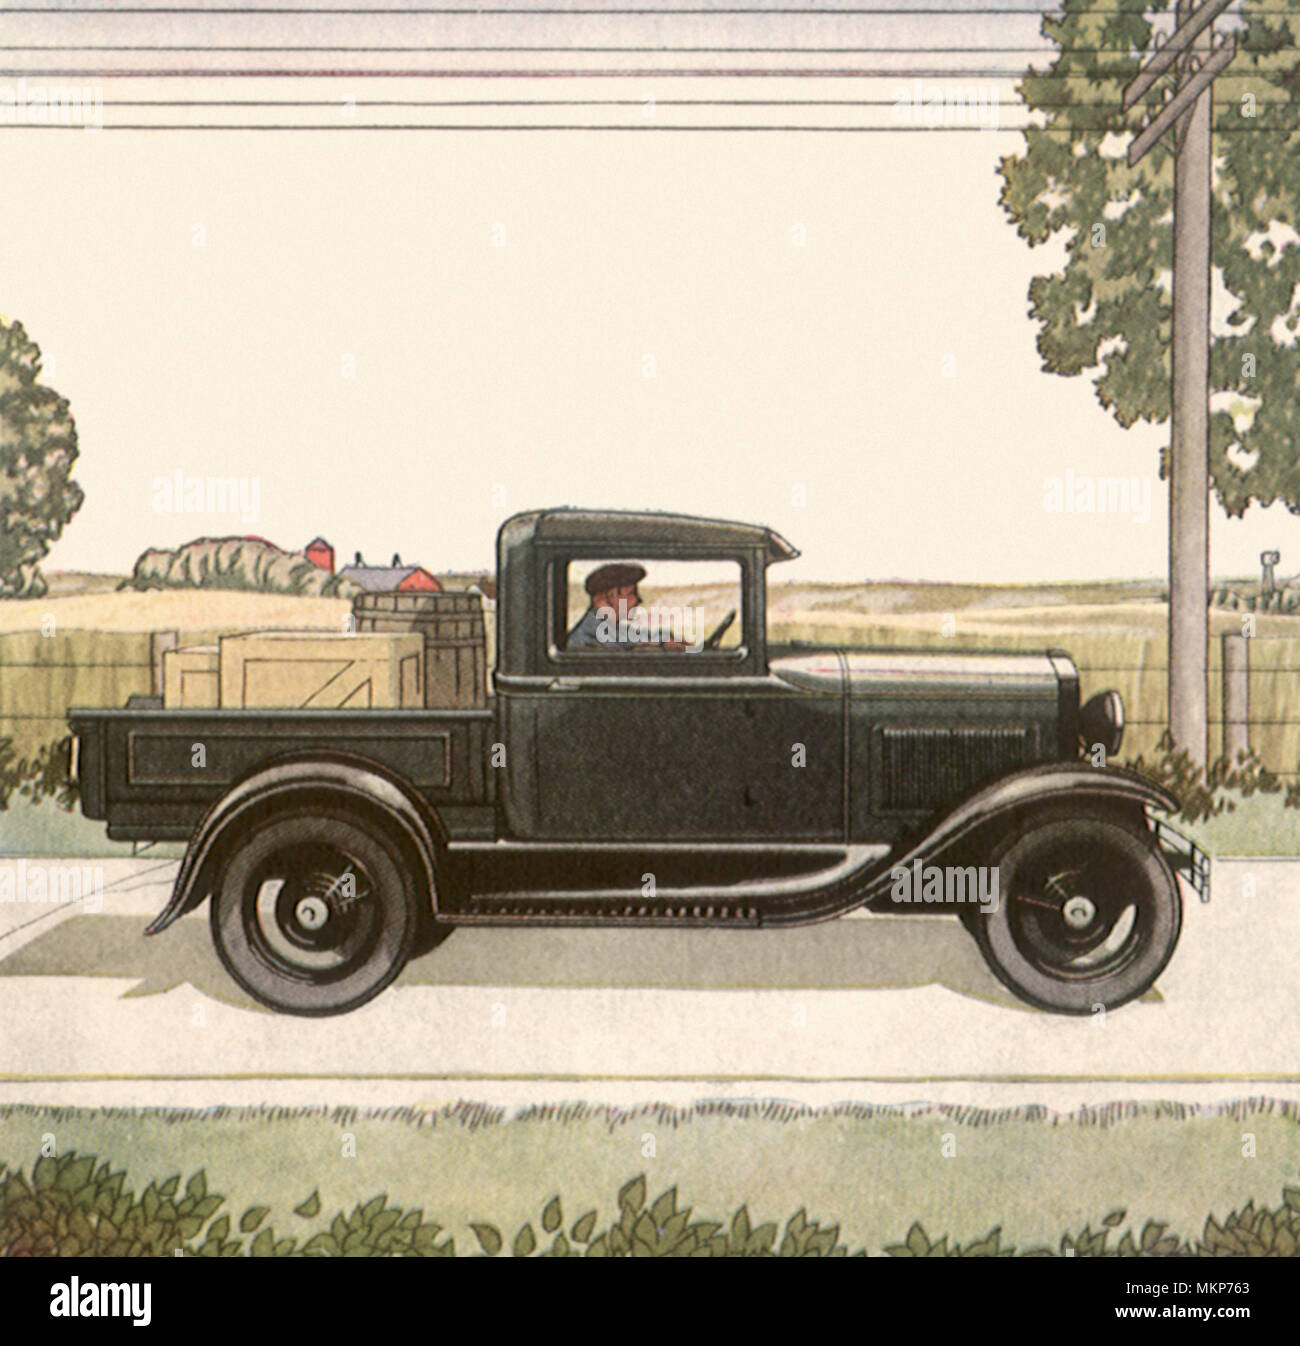 1930 Ford Truck Stock Photo